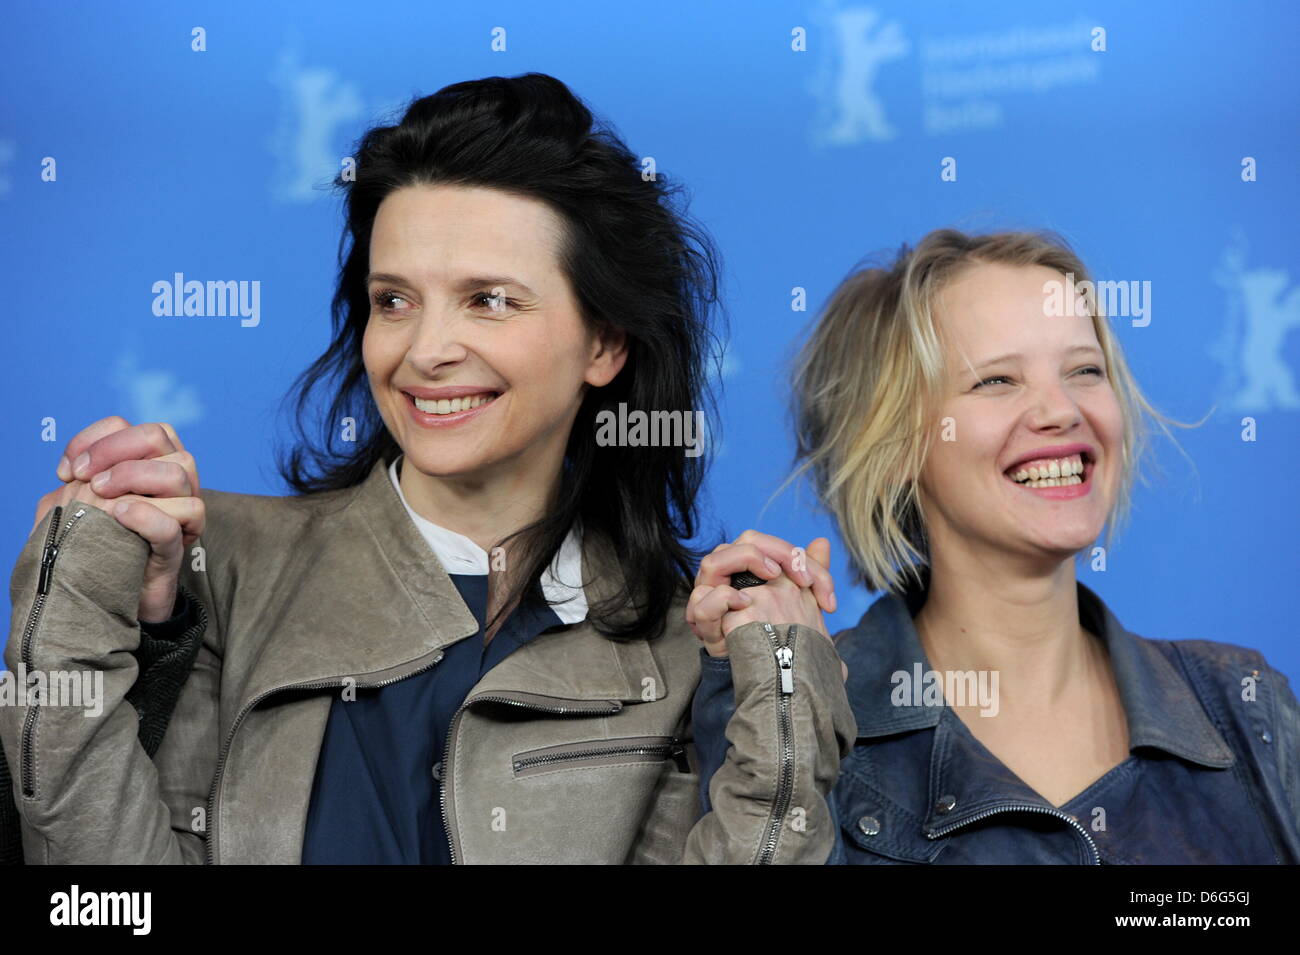 Polish actor Andrzej Chyra (L-R), French actress Juliette Binoche and Polish actress Joanna Kulig pose at a photocall for the movie  Elles  during the 62nd Berlin International Film Festival, in Berlin, Germany, 10 February 2012. The movie is presented in the section Panorama Special at the 62nd Berlinale running from 09 to 19 February. Photo: Angelika Warmuth dpa  +++(c) dpa - Bil Stock Photo